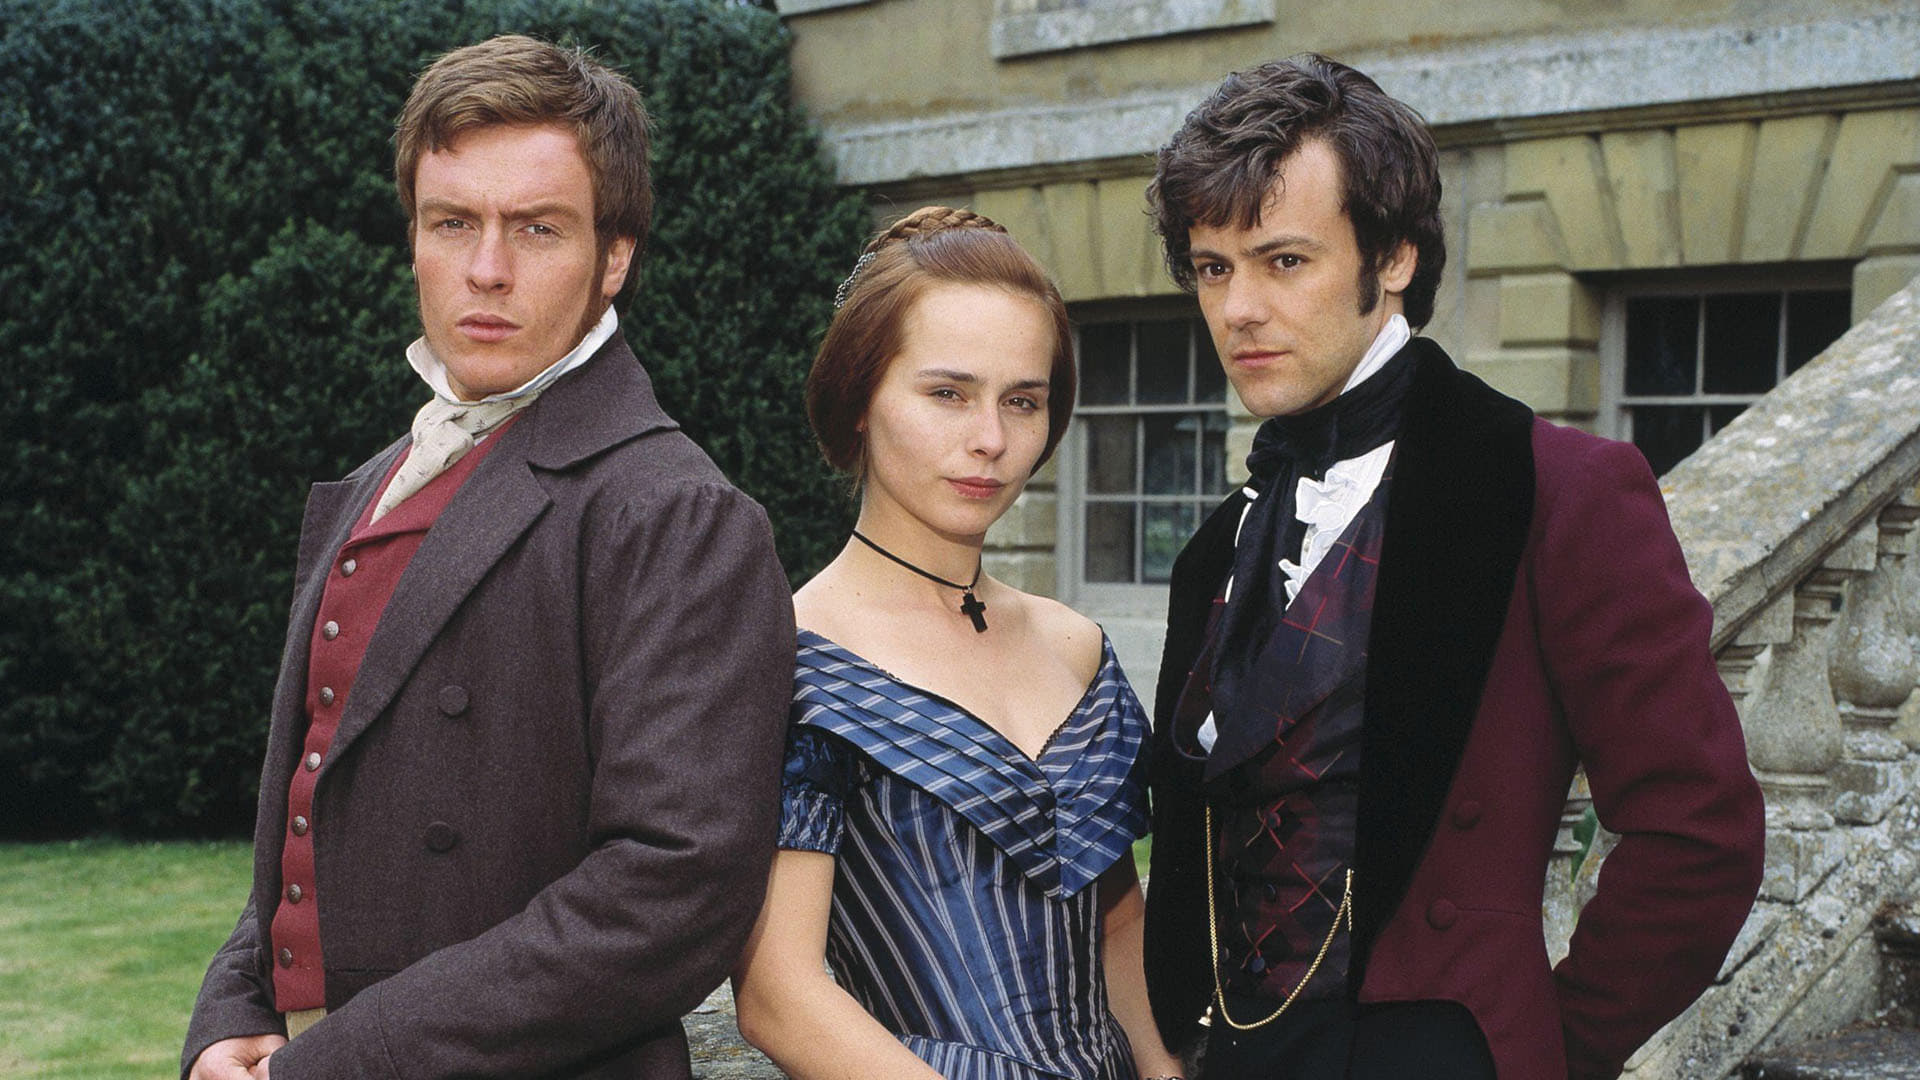 The Tenant of Wildfell Hall